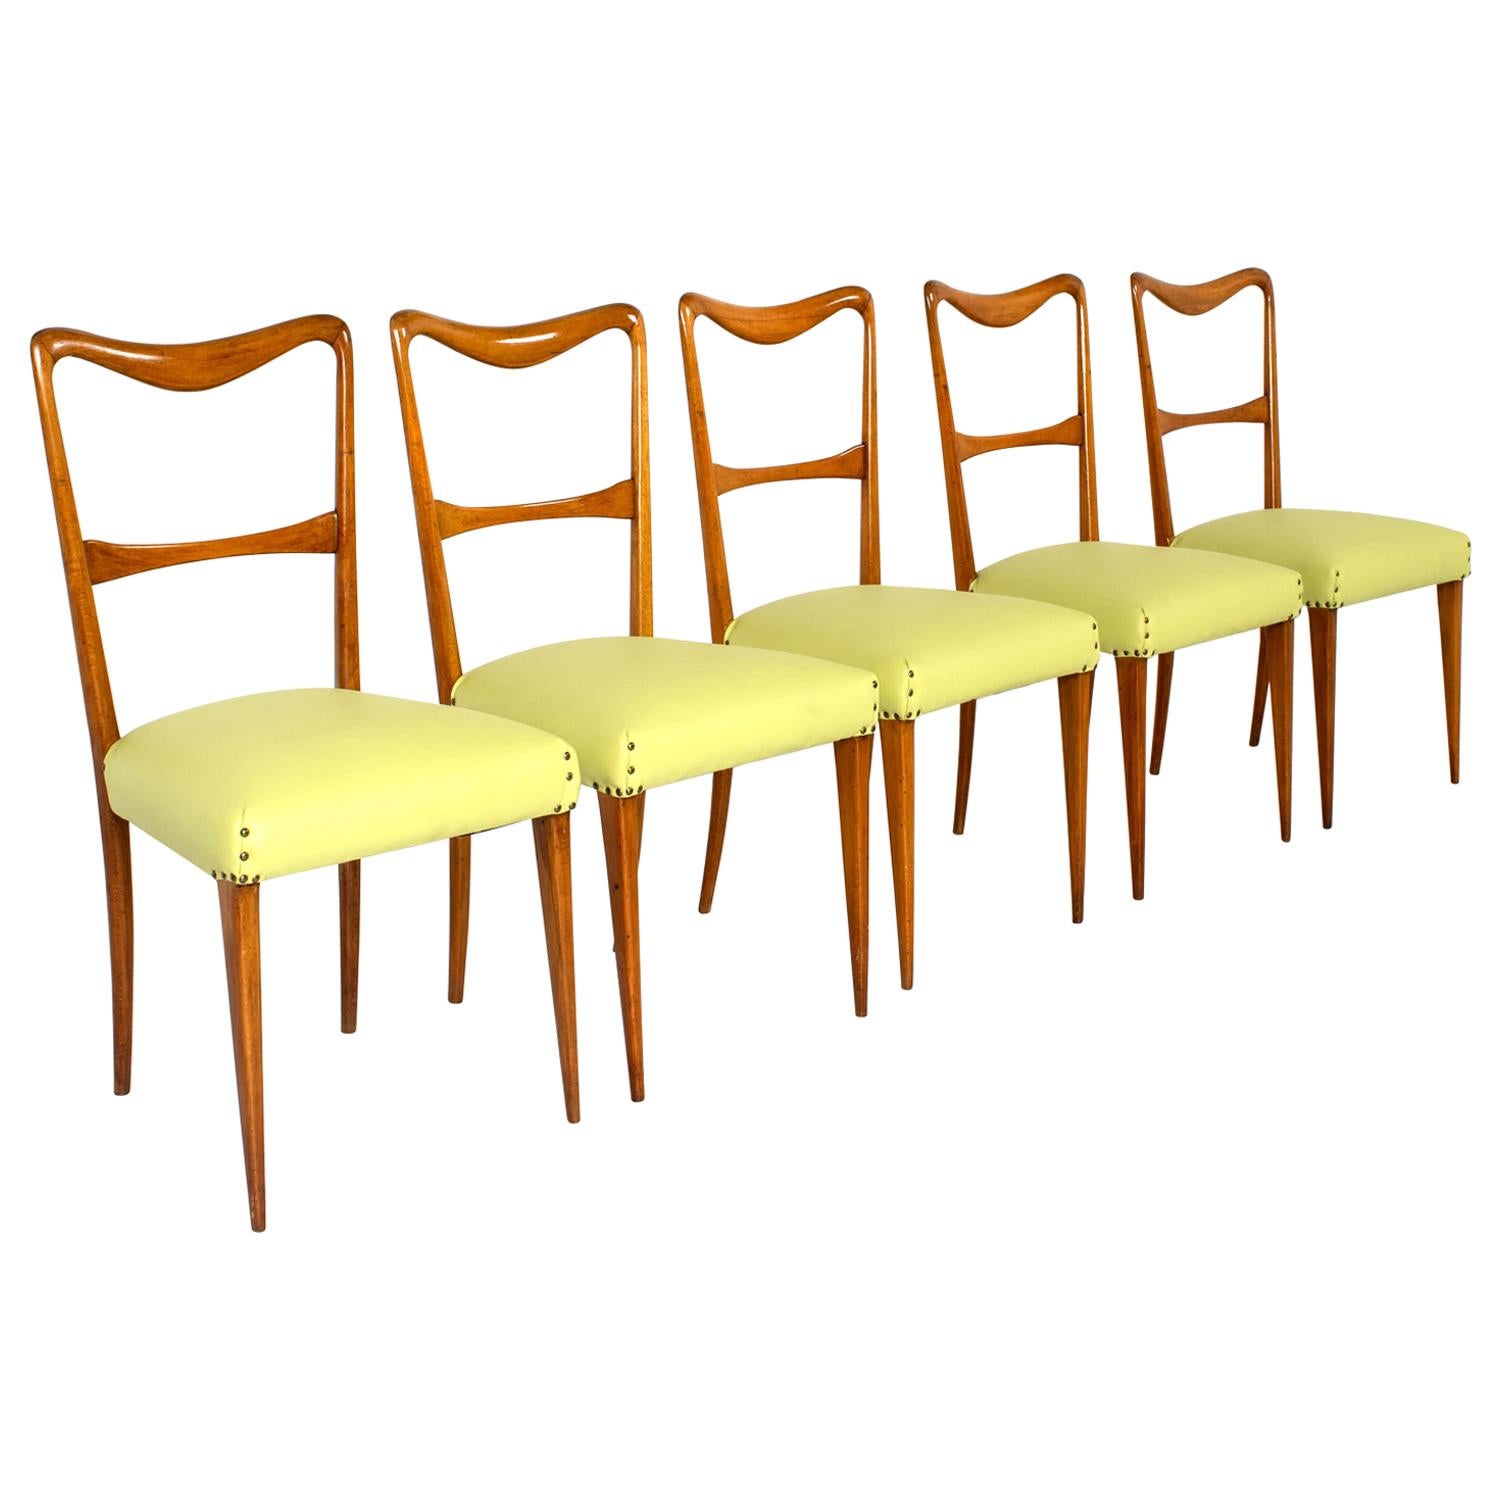 Set of 5 Italian Modern Dining Chairs in Style of Paolo Buffa, 1950s